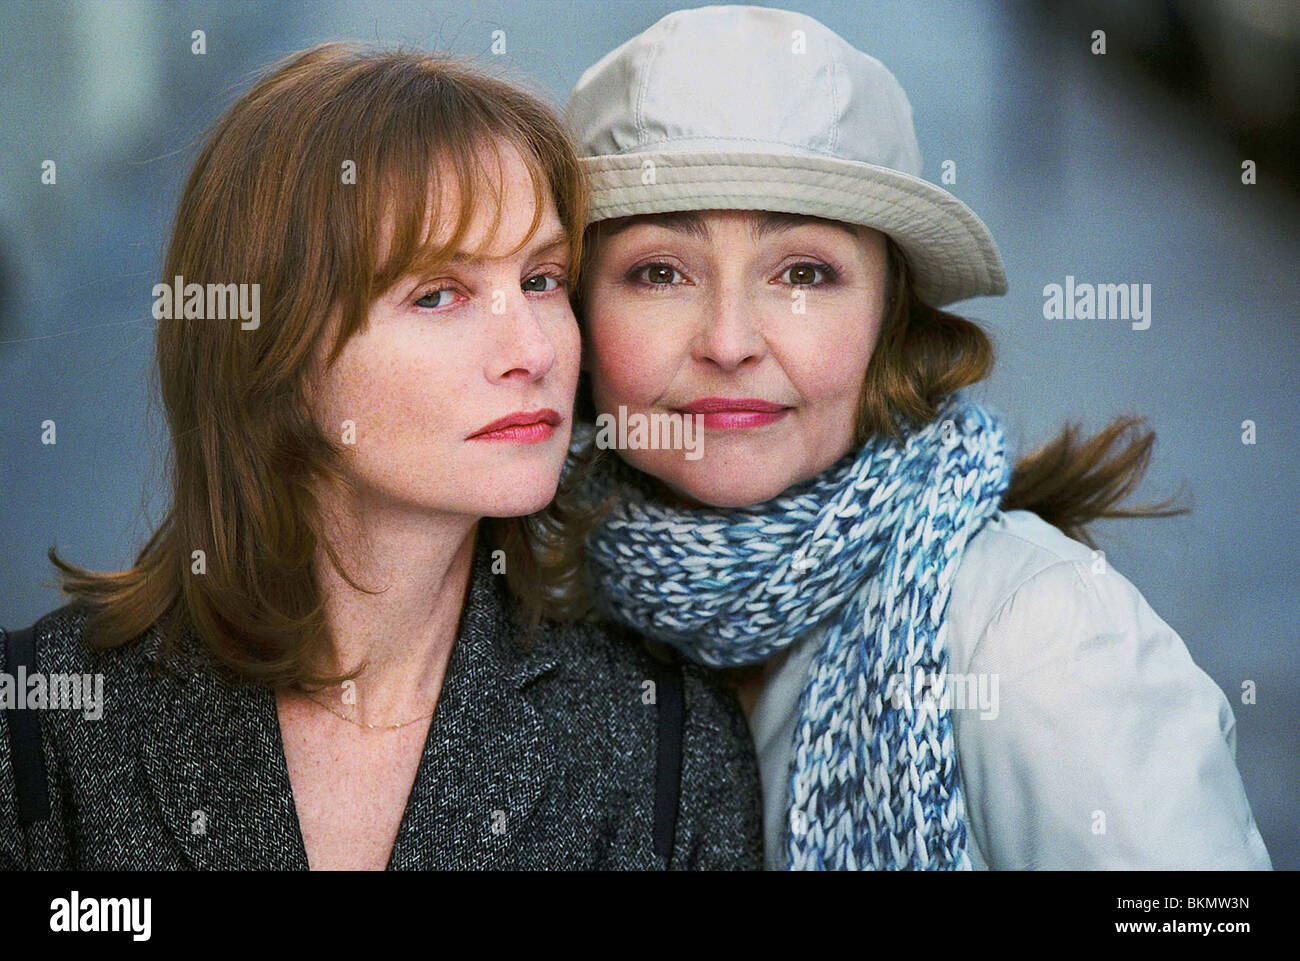 ME AND MY SISTER (2004) LES SOEURS FACHEES (ALT) ISABELLE HUPPERT, CATHERINE FROT MESI 001-01 Stock Photo